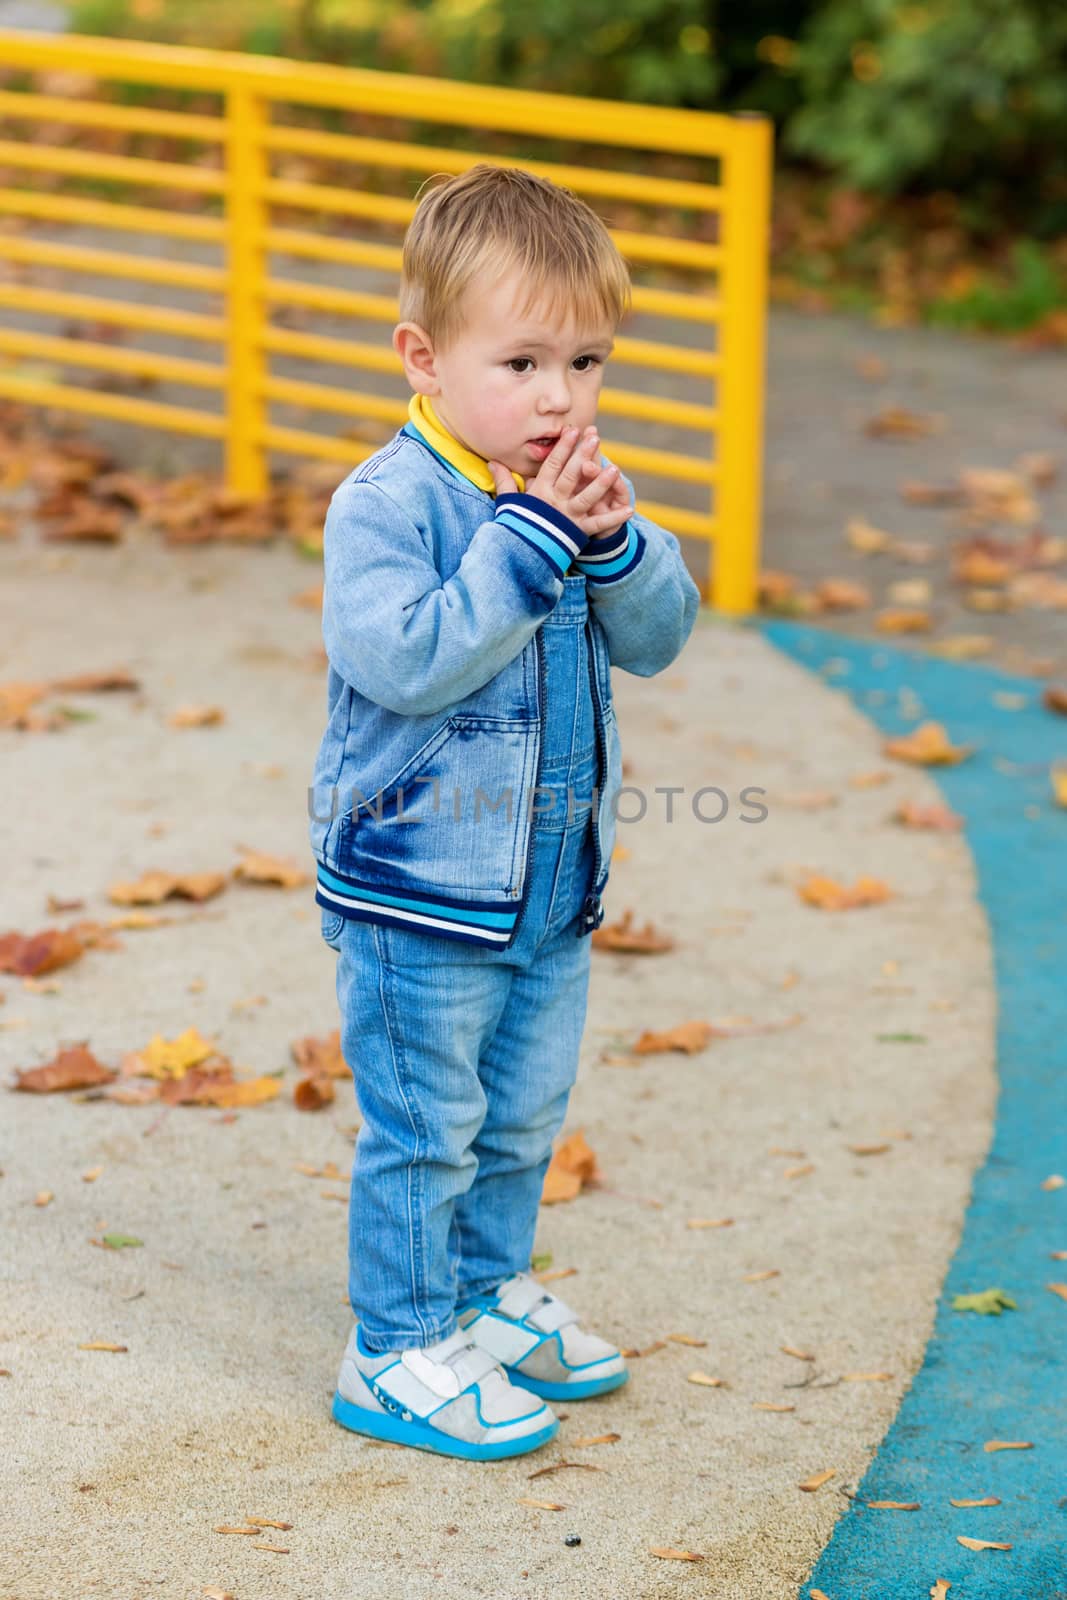 .A little boy in denim clothes stands scared alone in the middle of a playground in an autumn park.